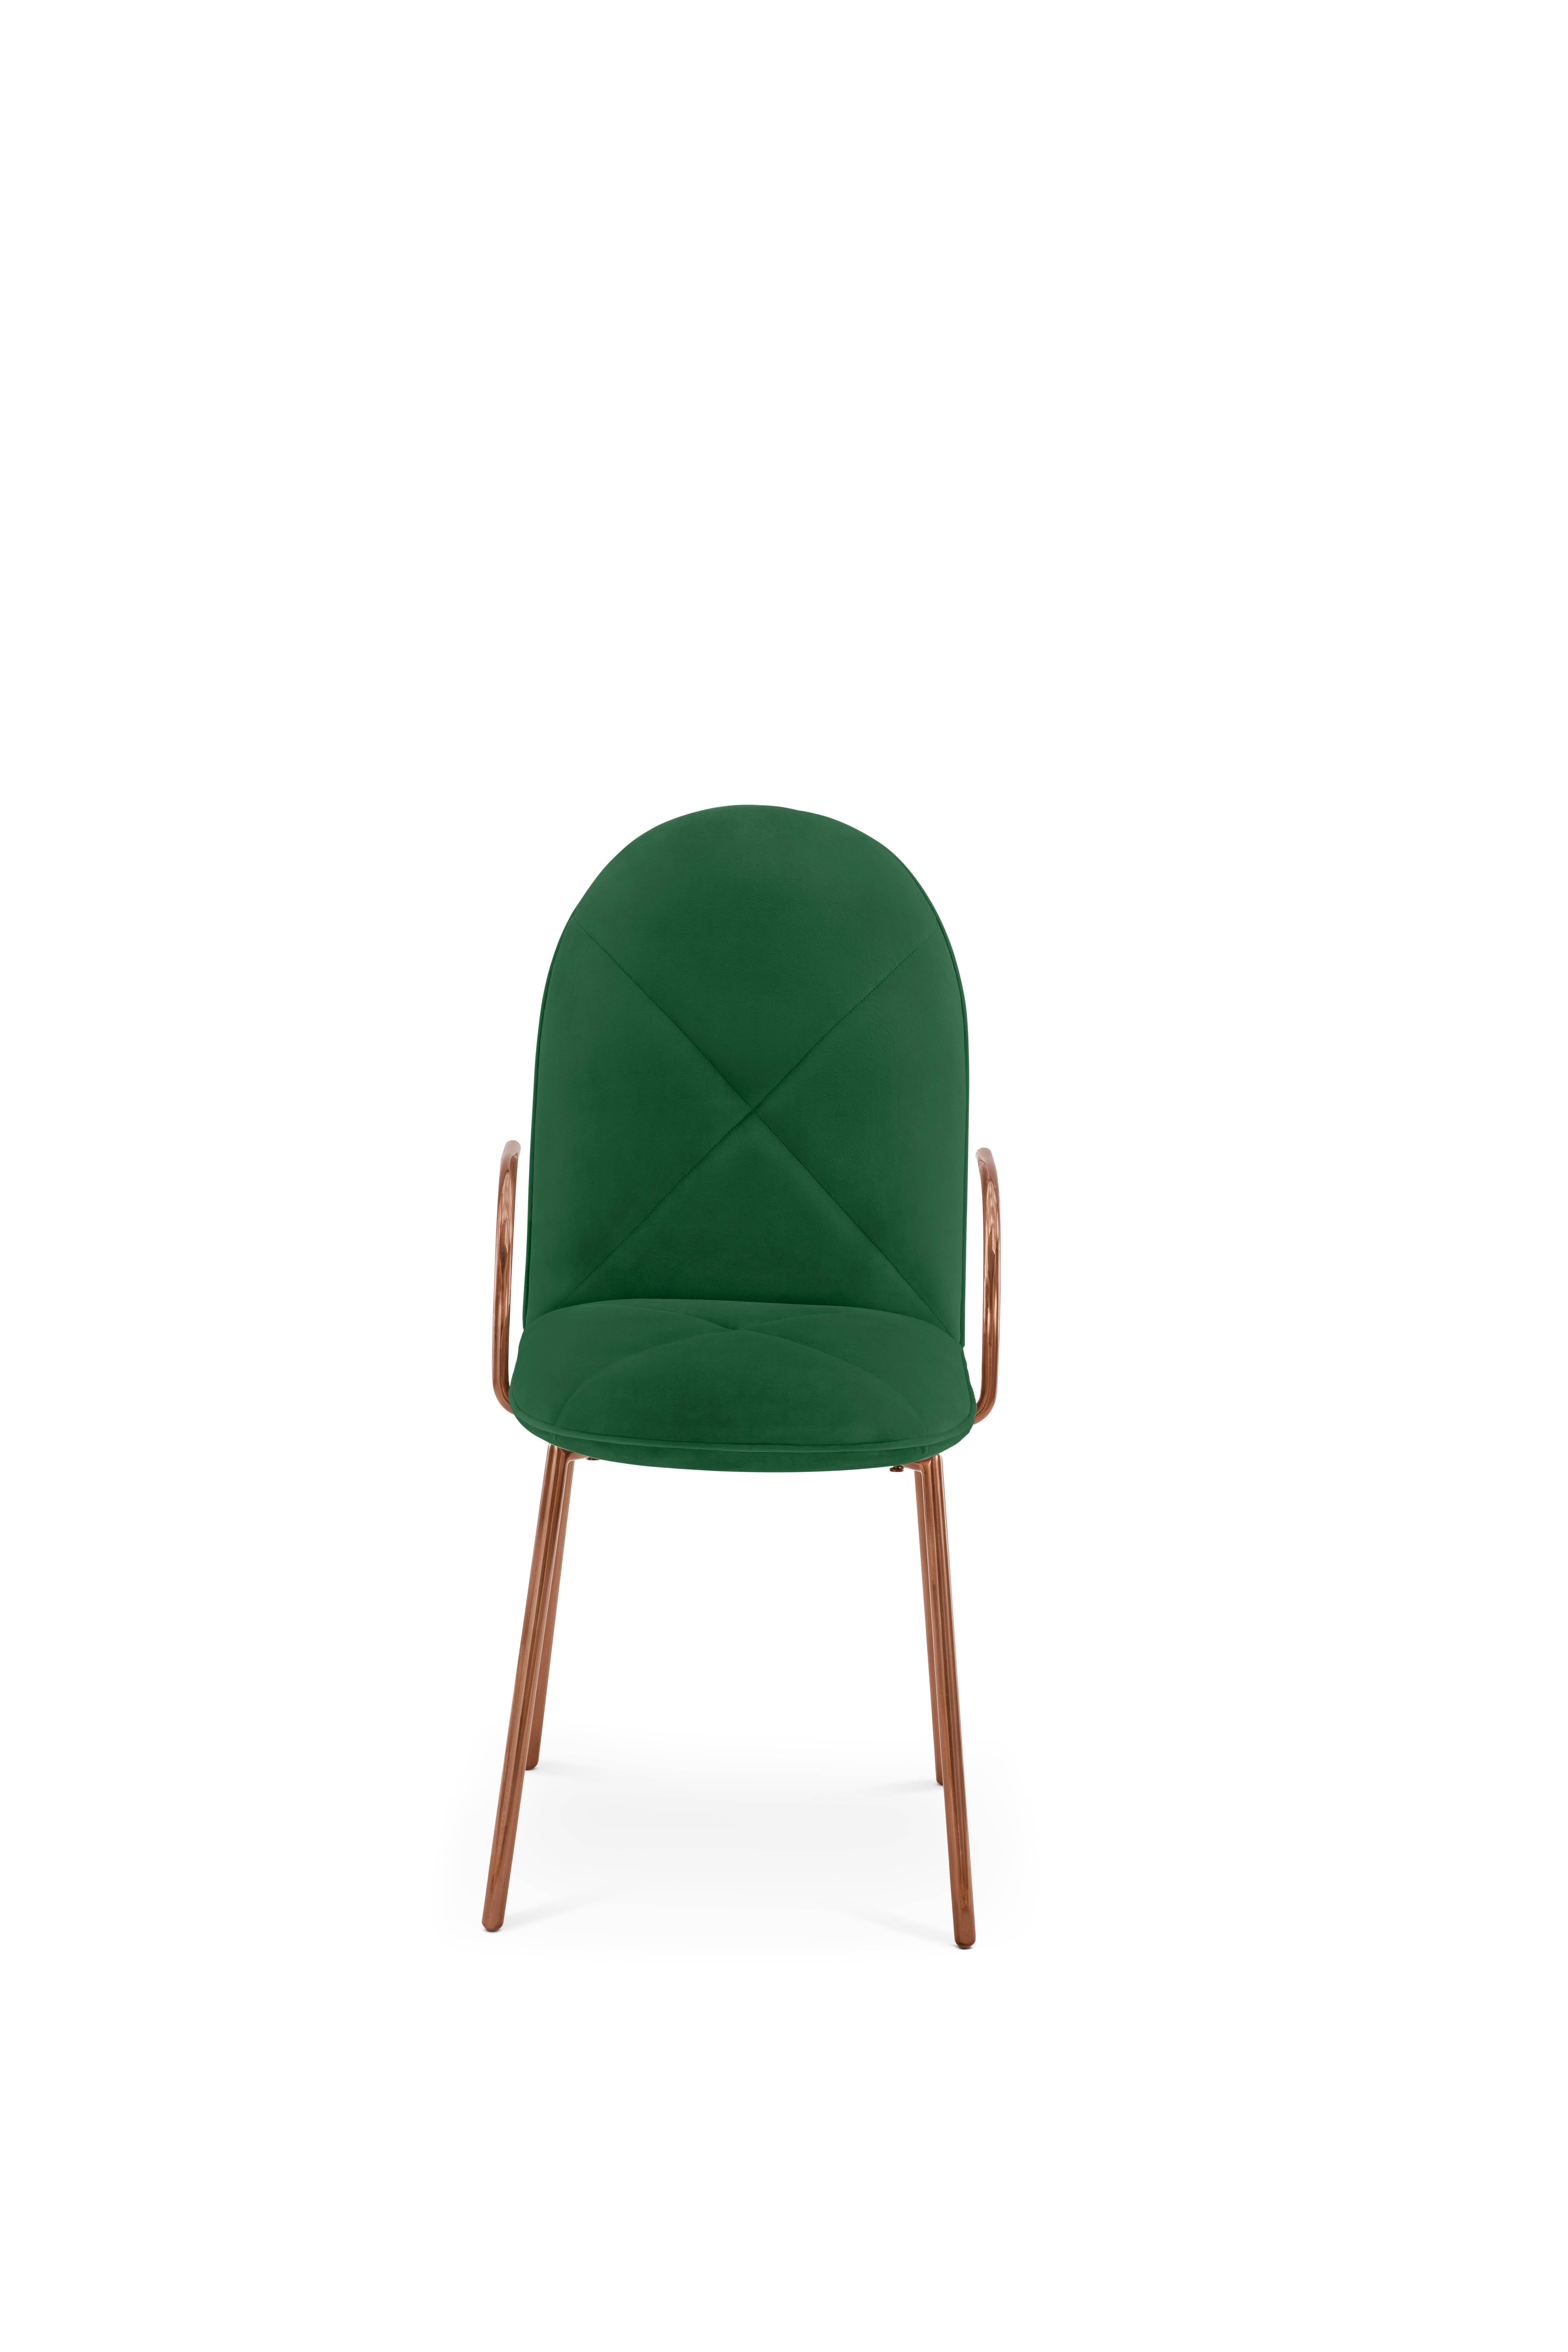 Orion Chair Green by Nika Zupanc for Scarlet Splendour For Sale 1